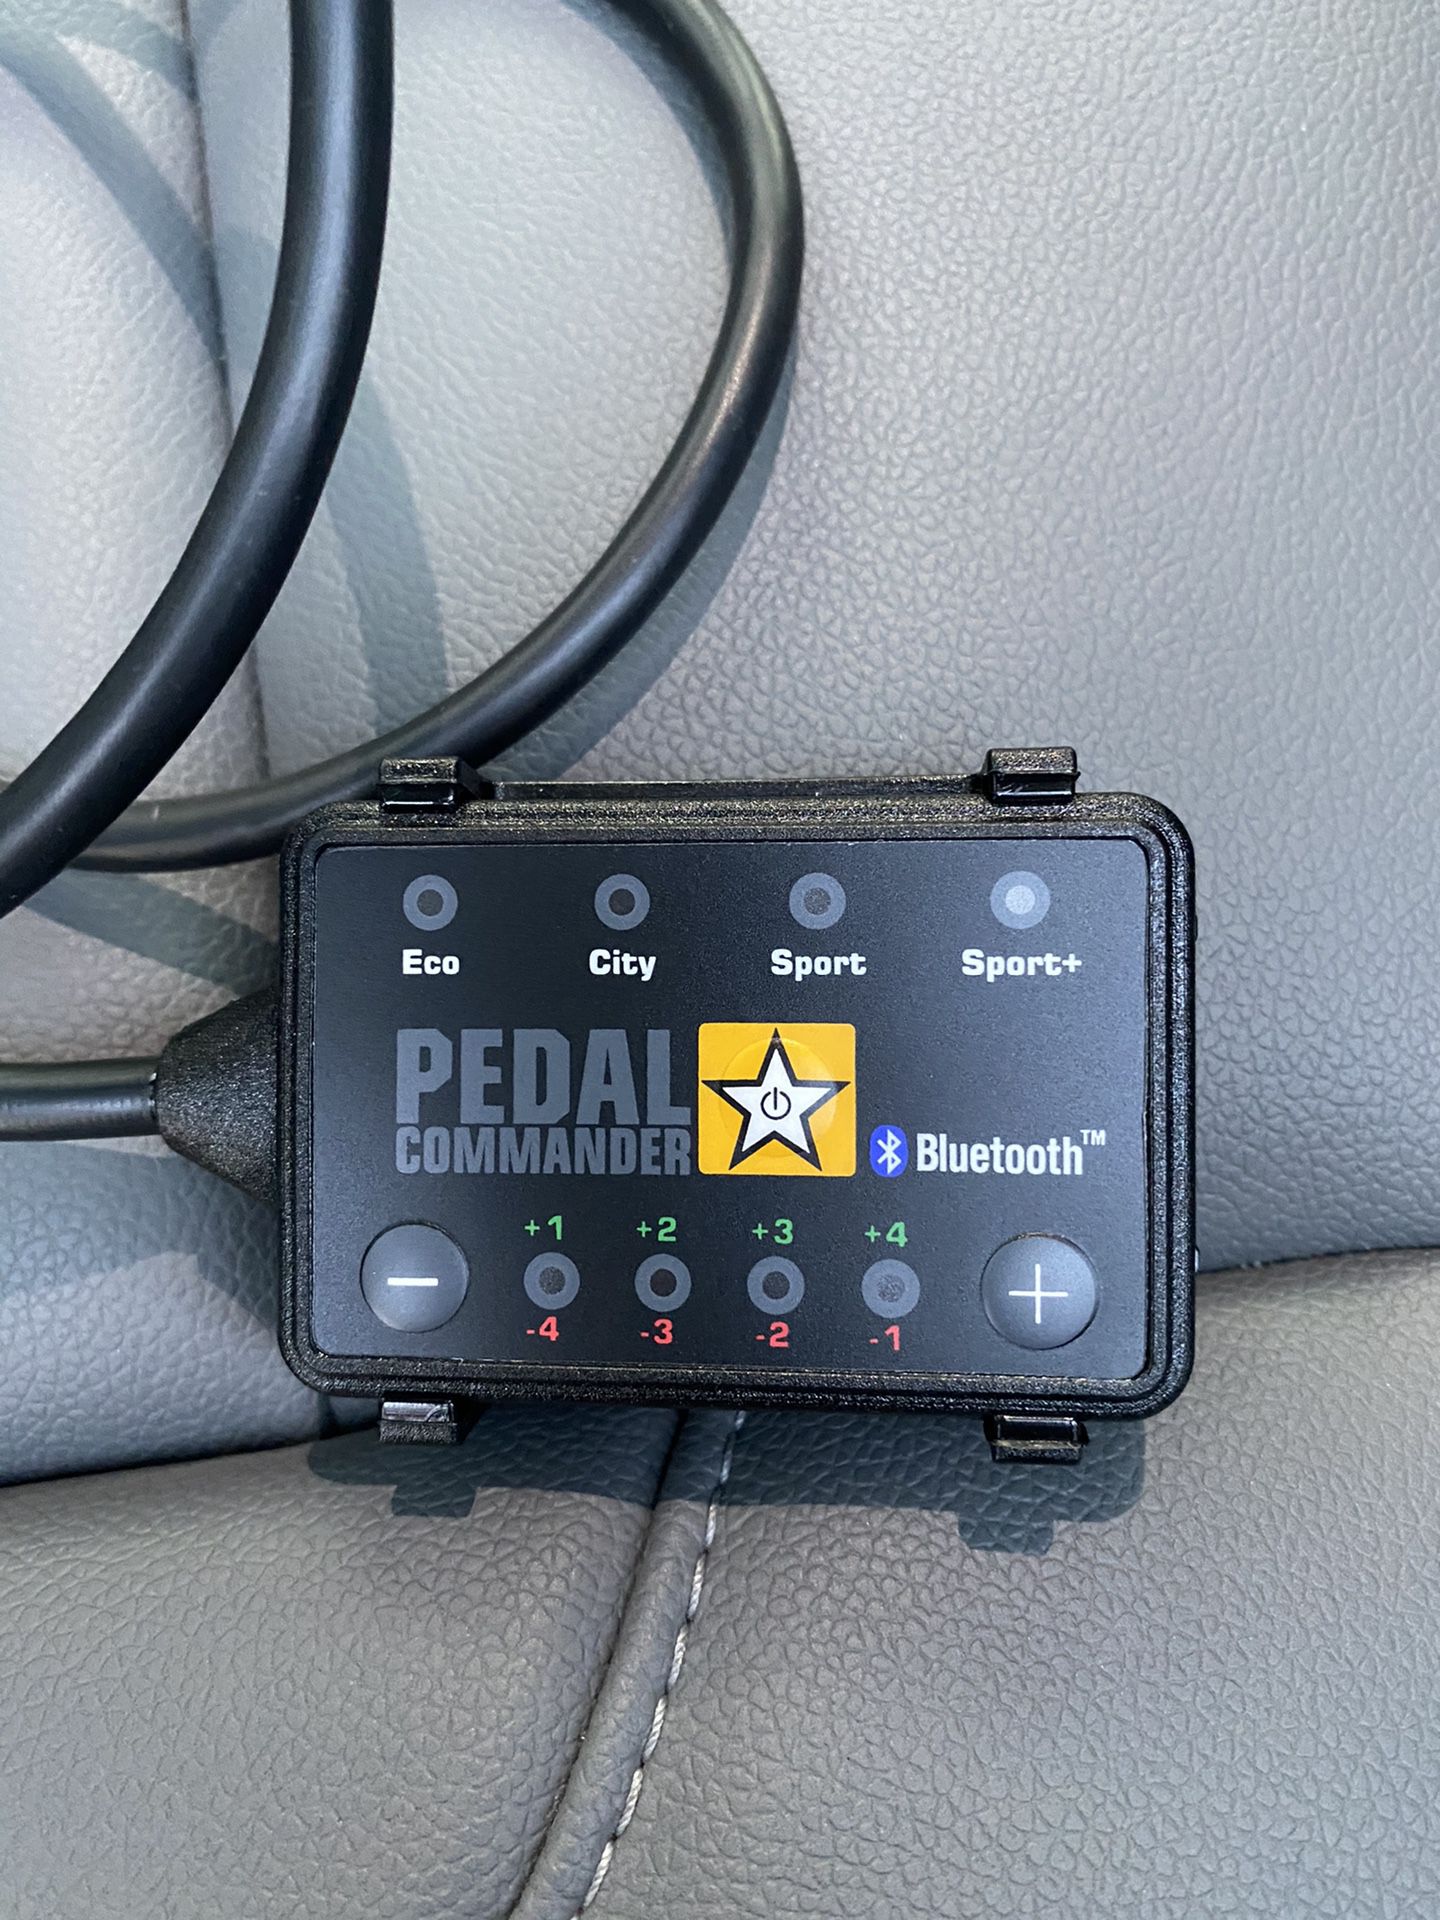 Pedal commander with Bluetooth for GM